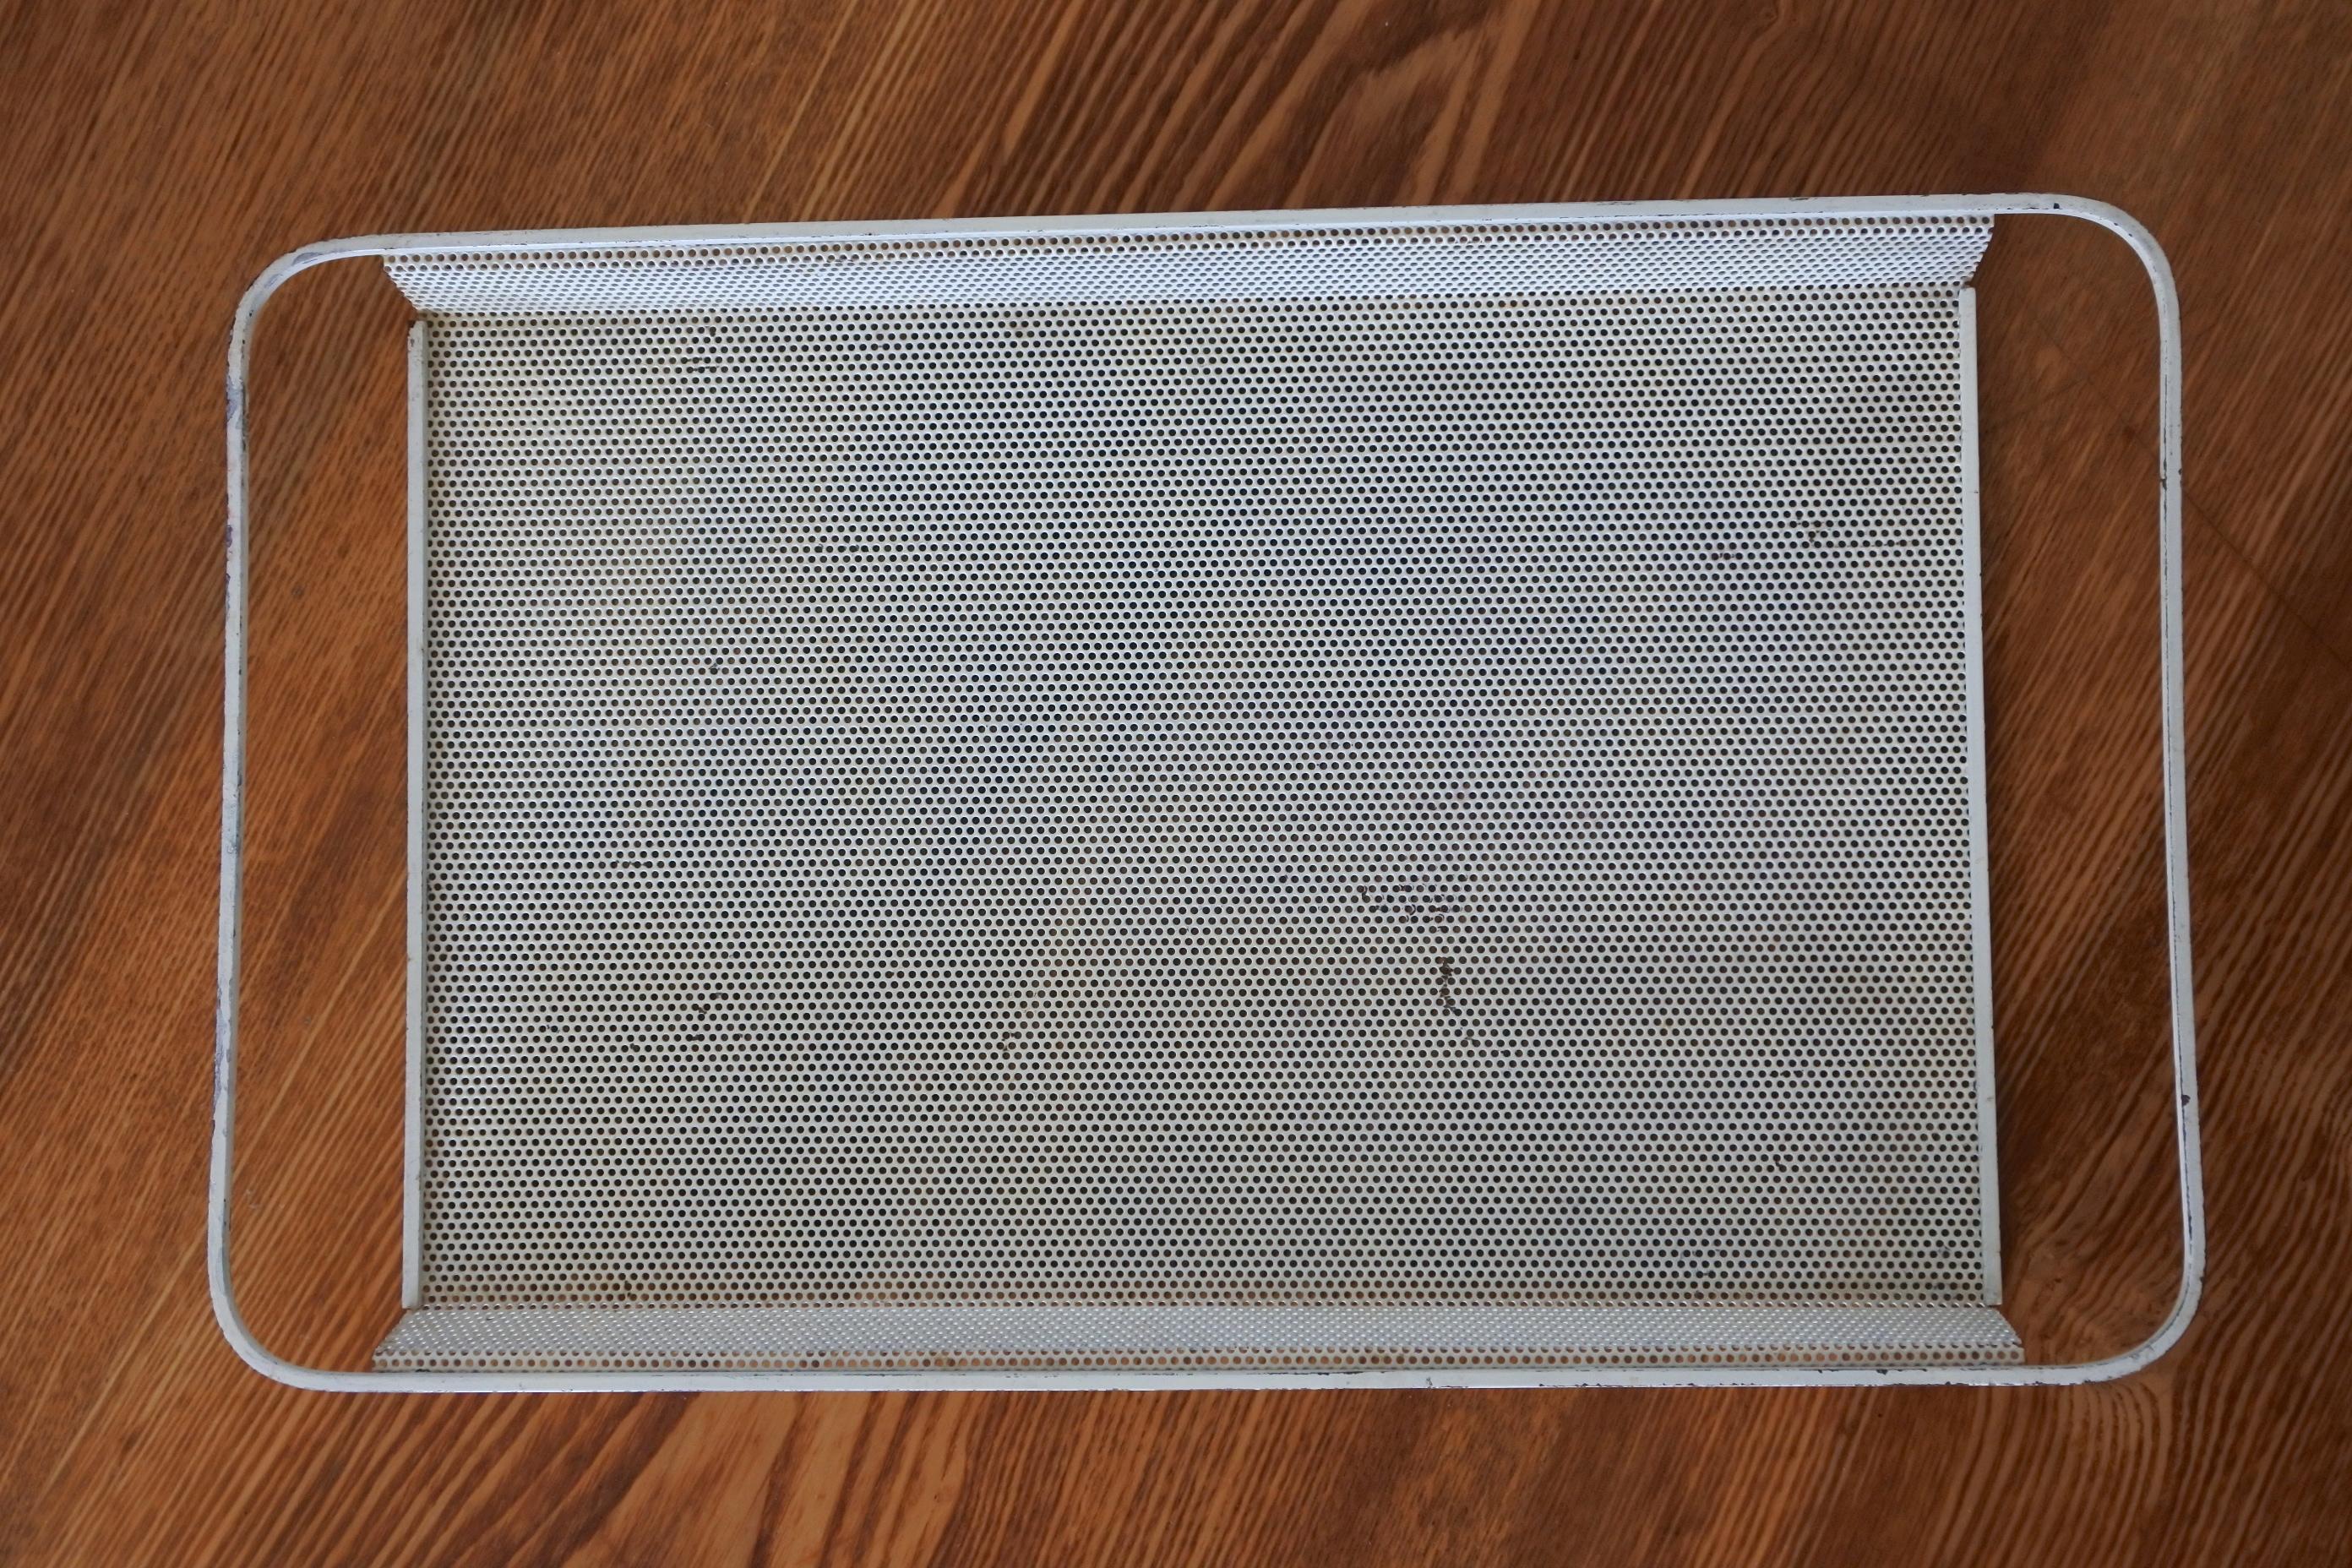 French Pair of Mathieu Mategot Perforated Metal Trays, France, 1950s